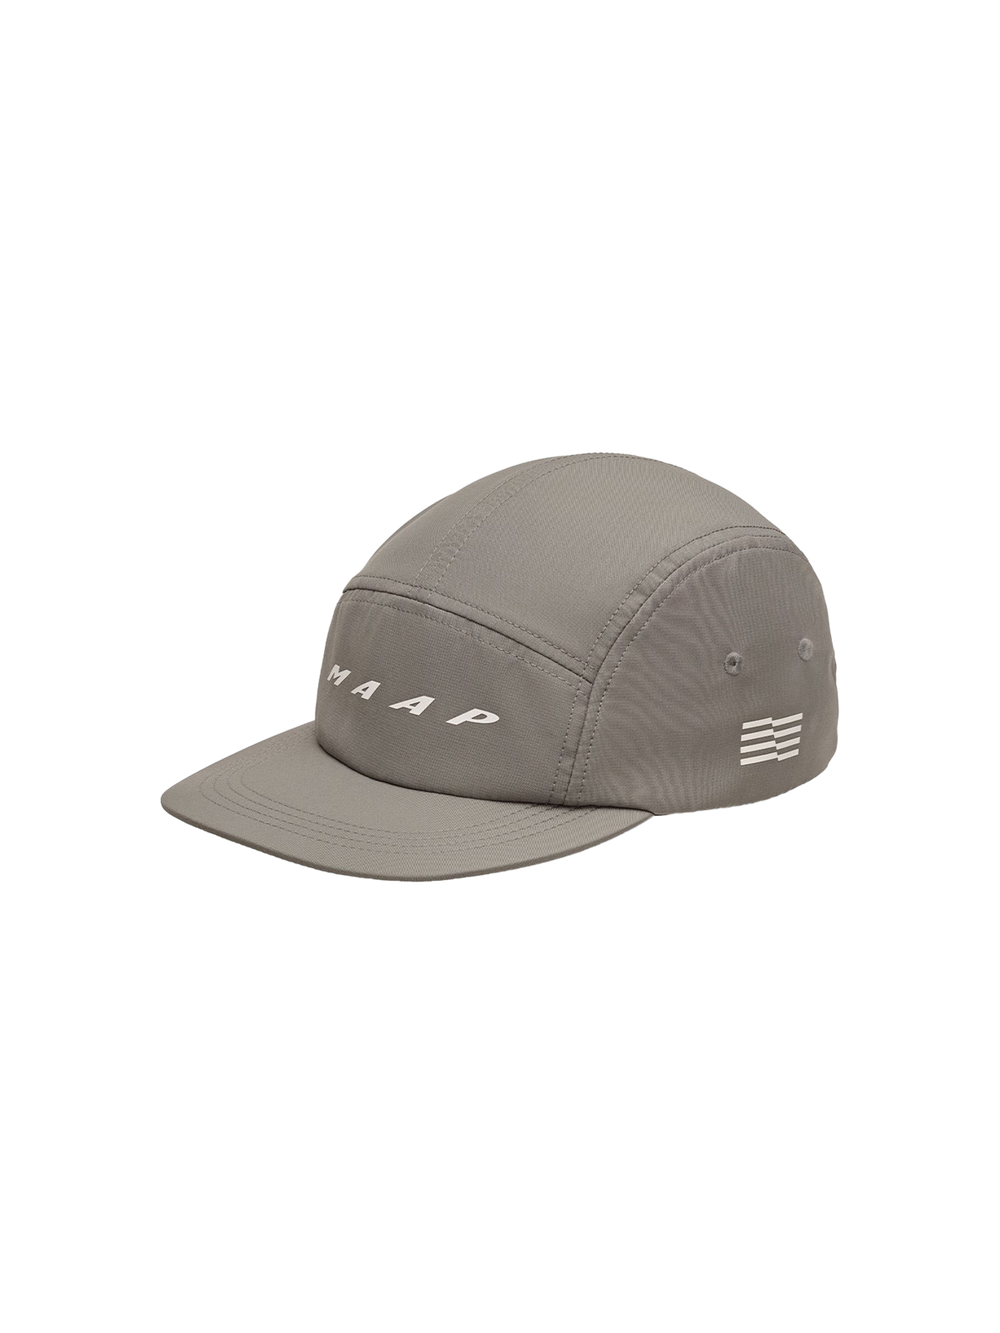 Product Image for Evade 5 Panel Cap